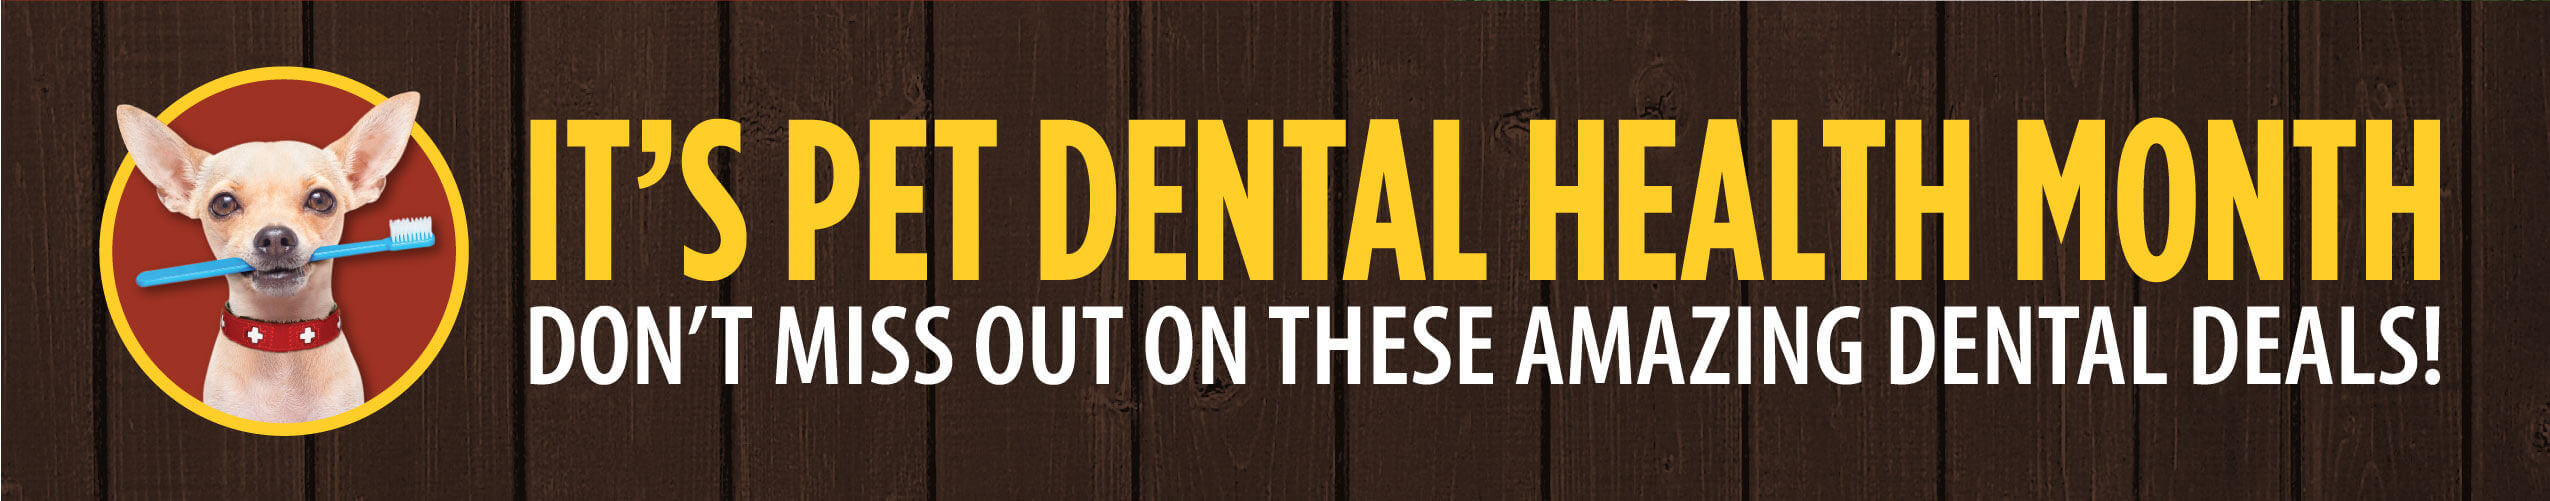 It's Pet Dental Health Month, Don't Miss out on these Amazing Dental Deals!